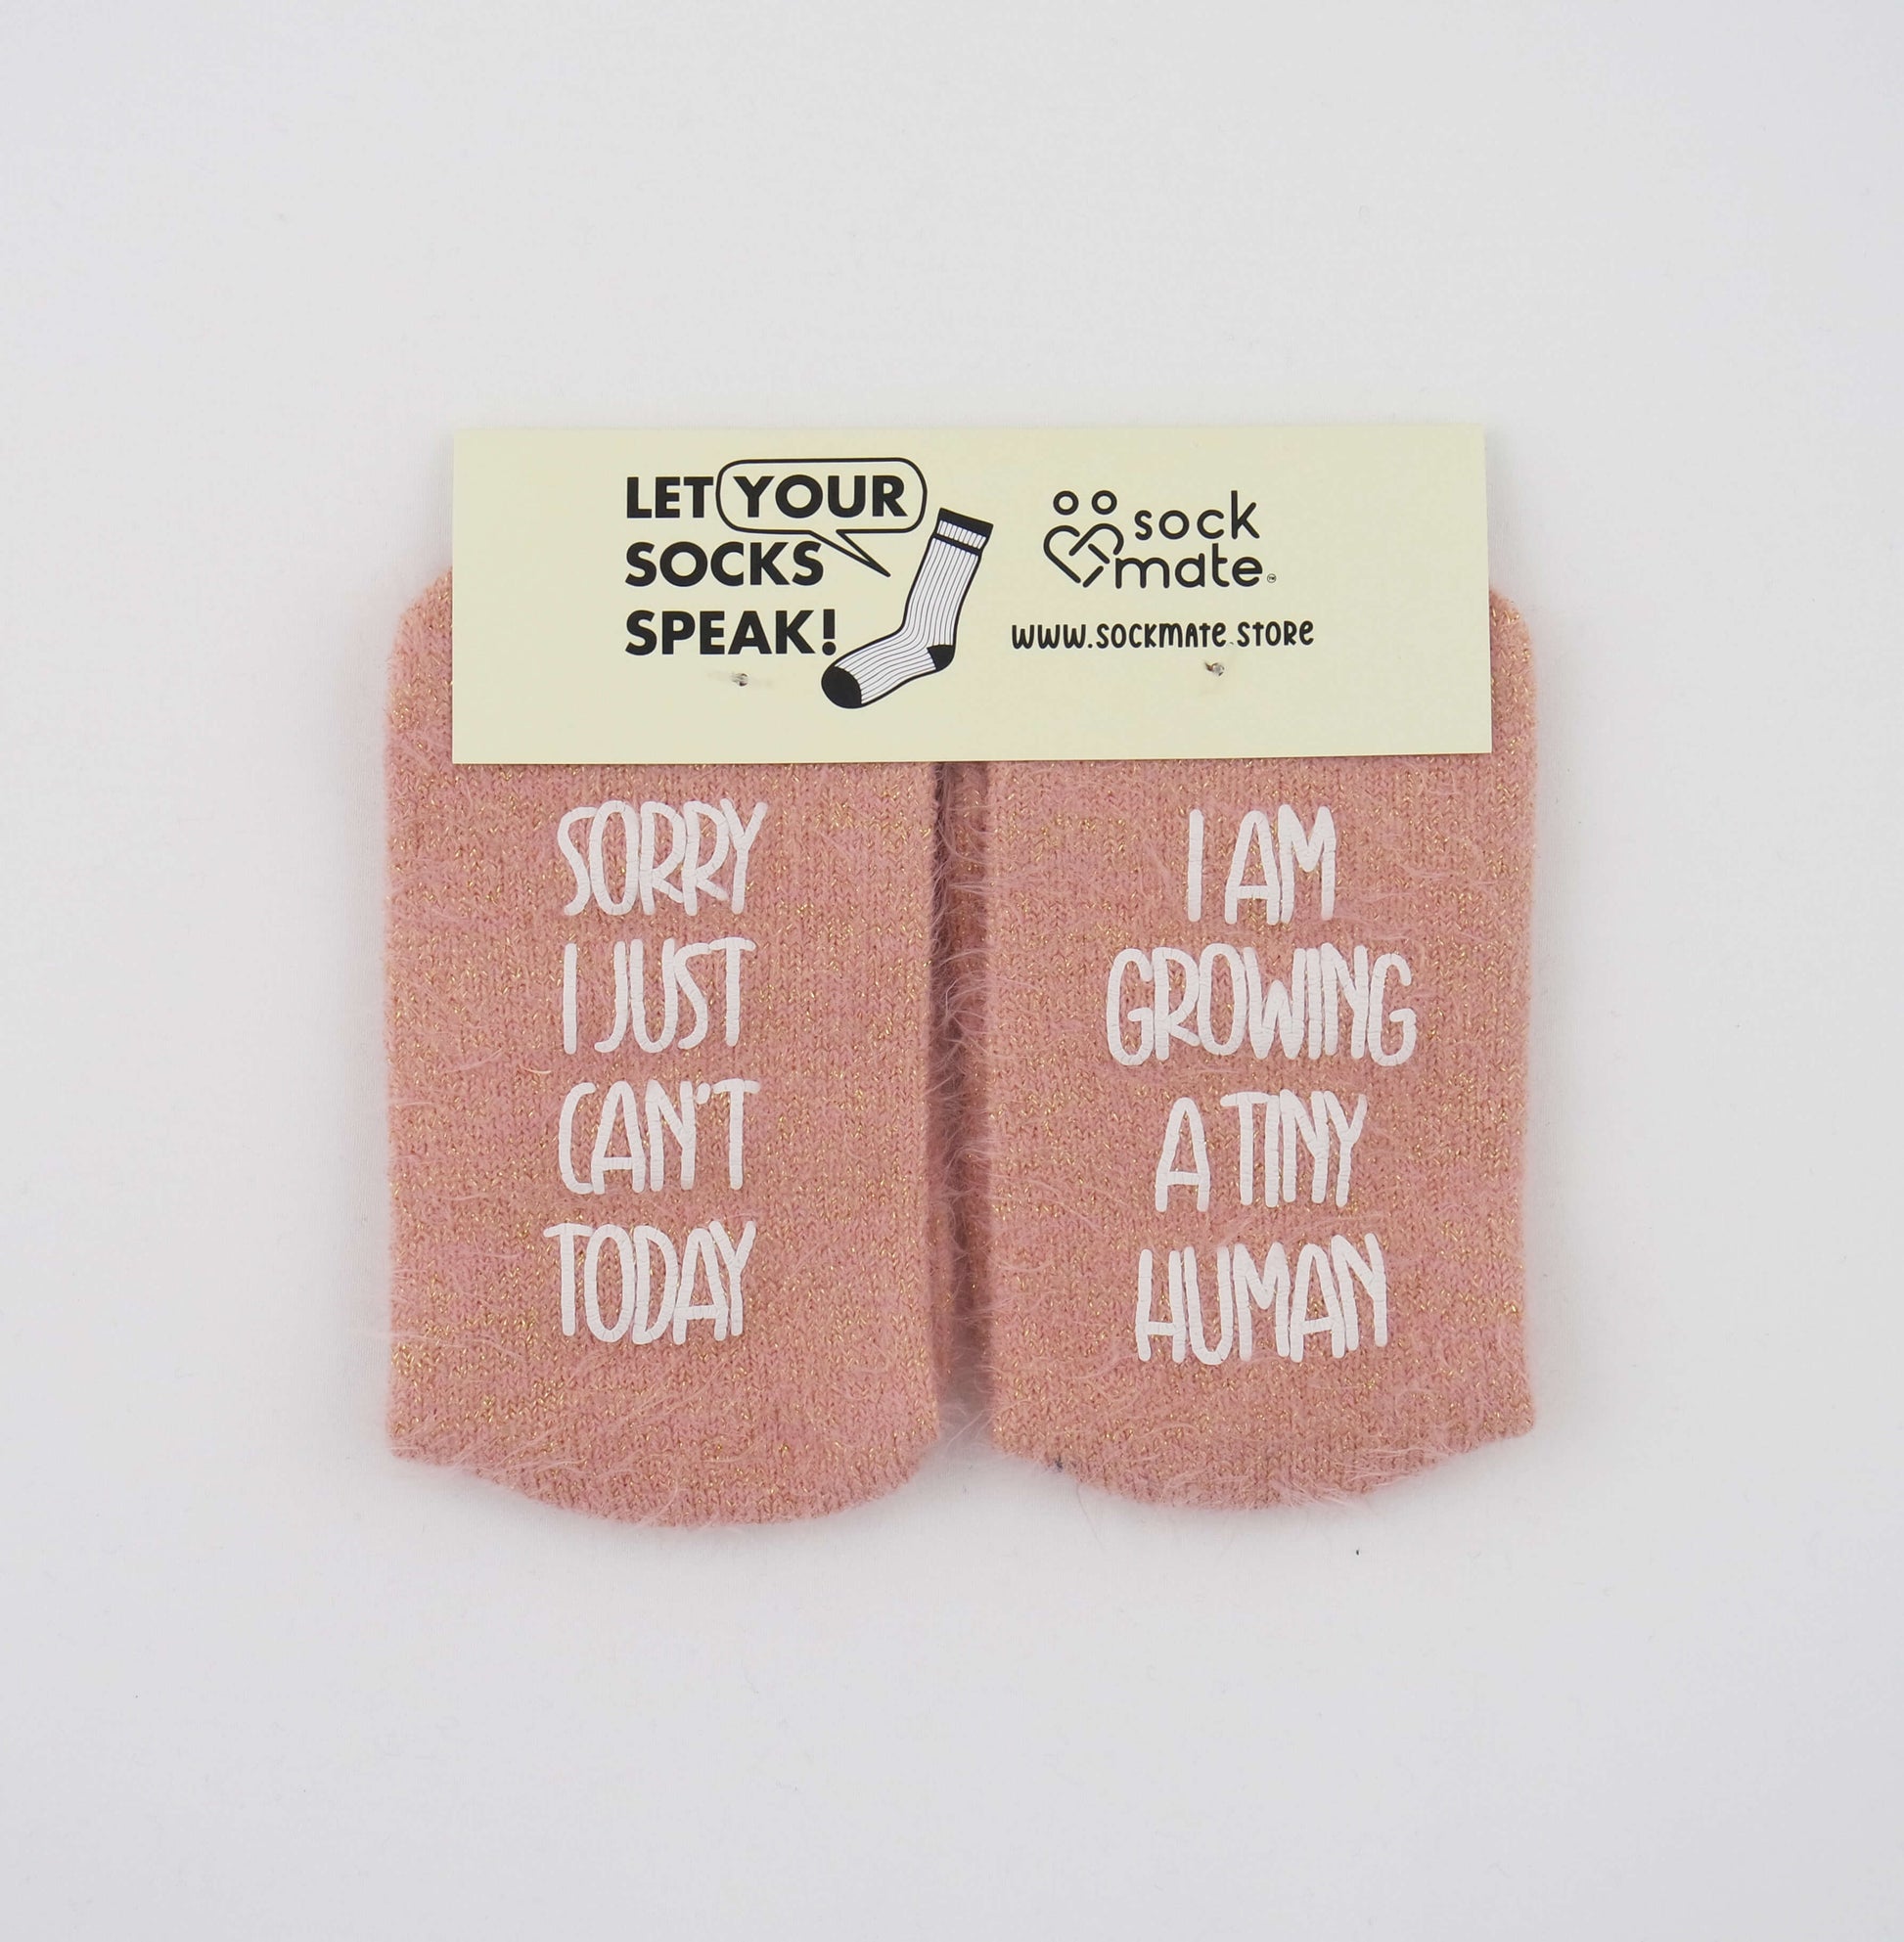 Socks adorned with a light-hearted expression of pregnancy, symbolizing the awe-inspiring process of bringing a new life into the world.